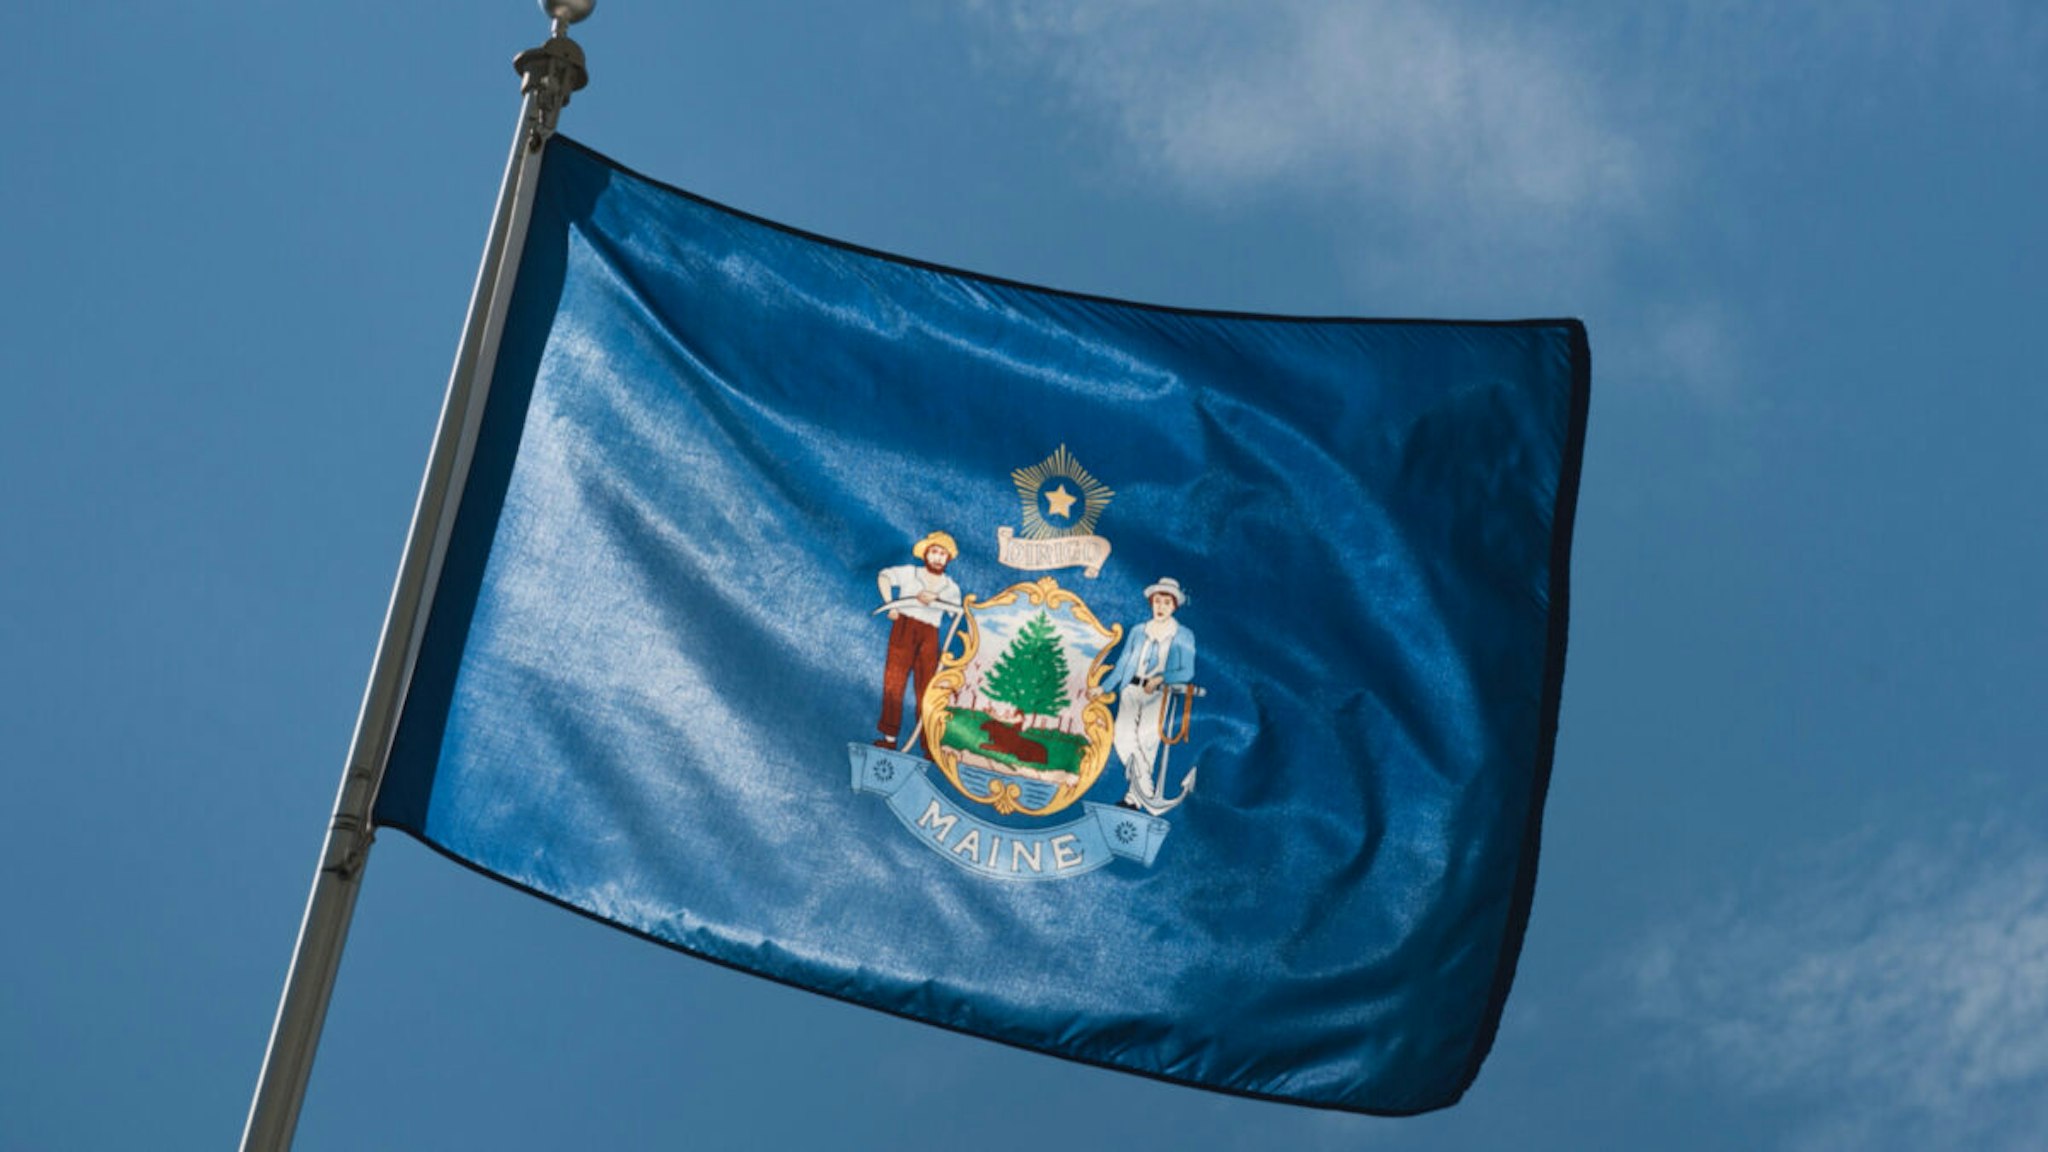 Maine State flag against sky - stock photo.